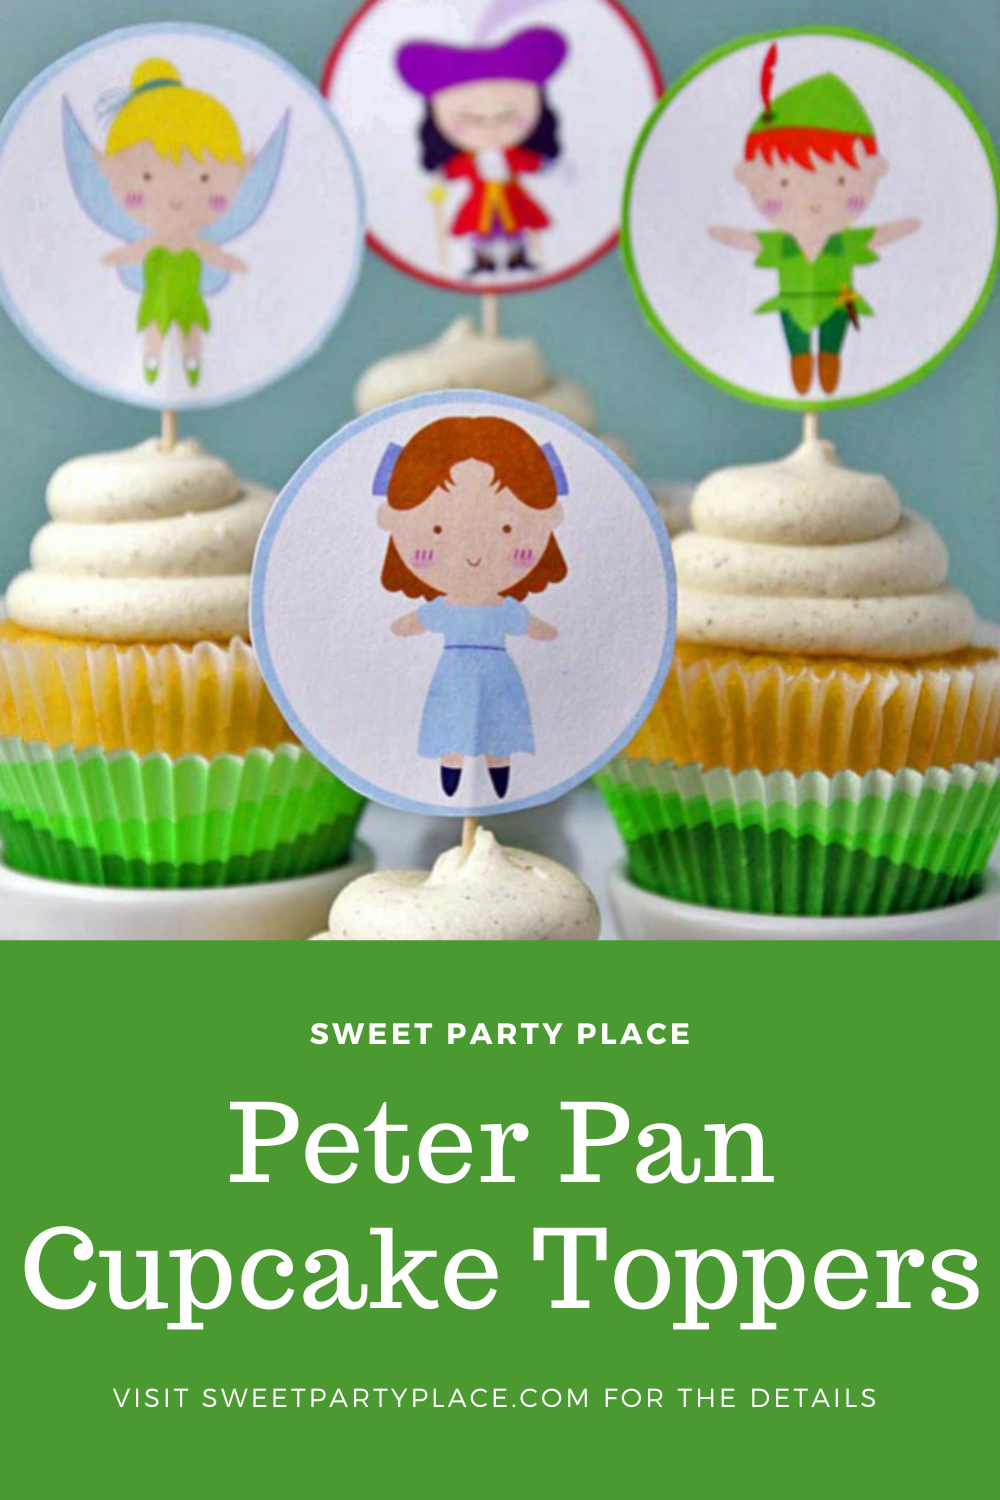 https://sweetpartyplace.com/wp-content/uploads/2019/05/Peter-Pan-Cupcake-Toppers.png